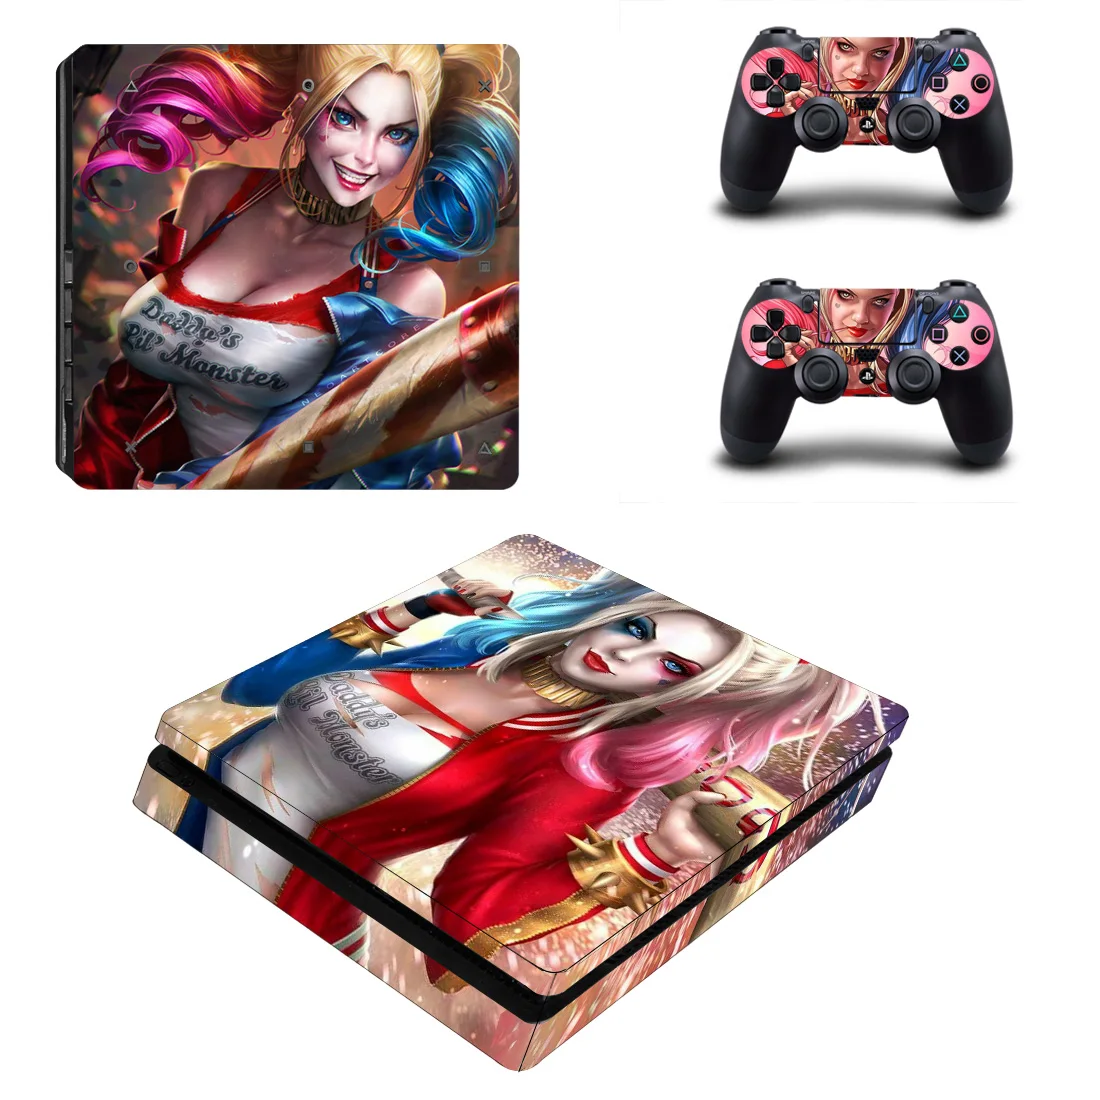 

New Film PS4 Slim Stickers Play station 4 Skin Sticker Decal Cover For PlayStation 4 PS4 Slim Consol & Controller Skins